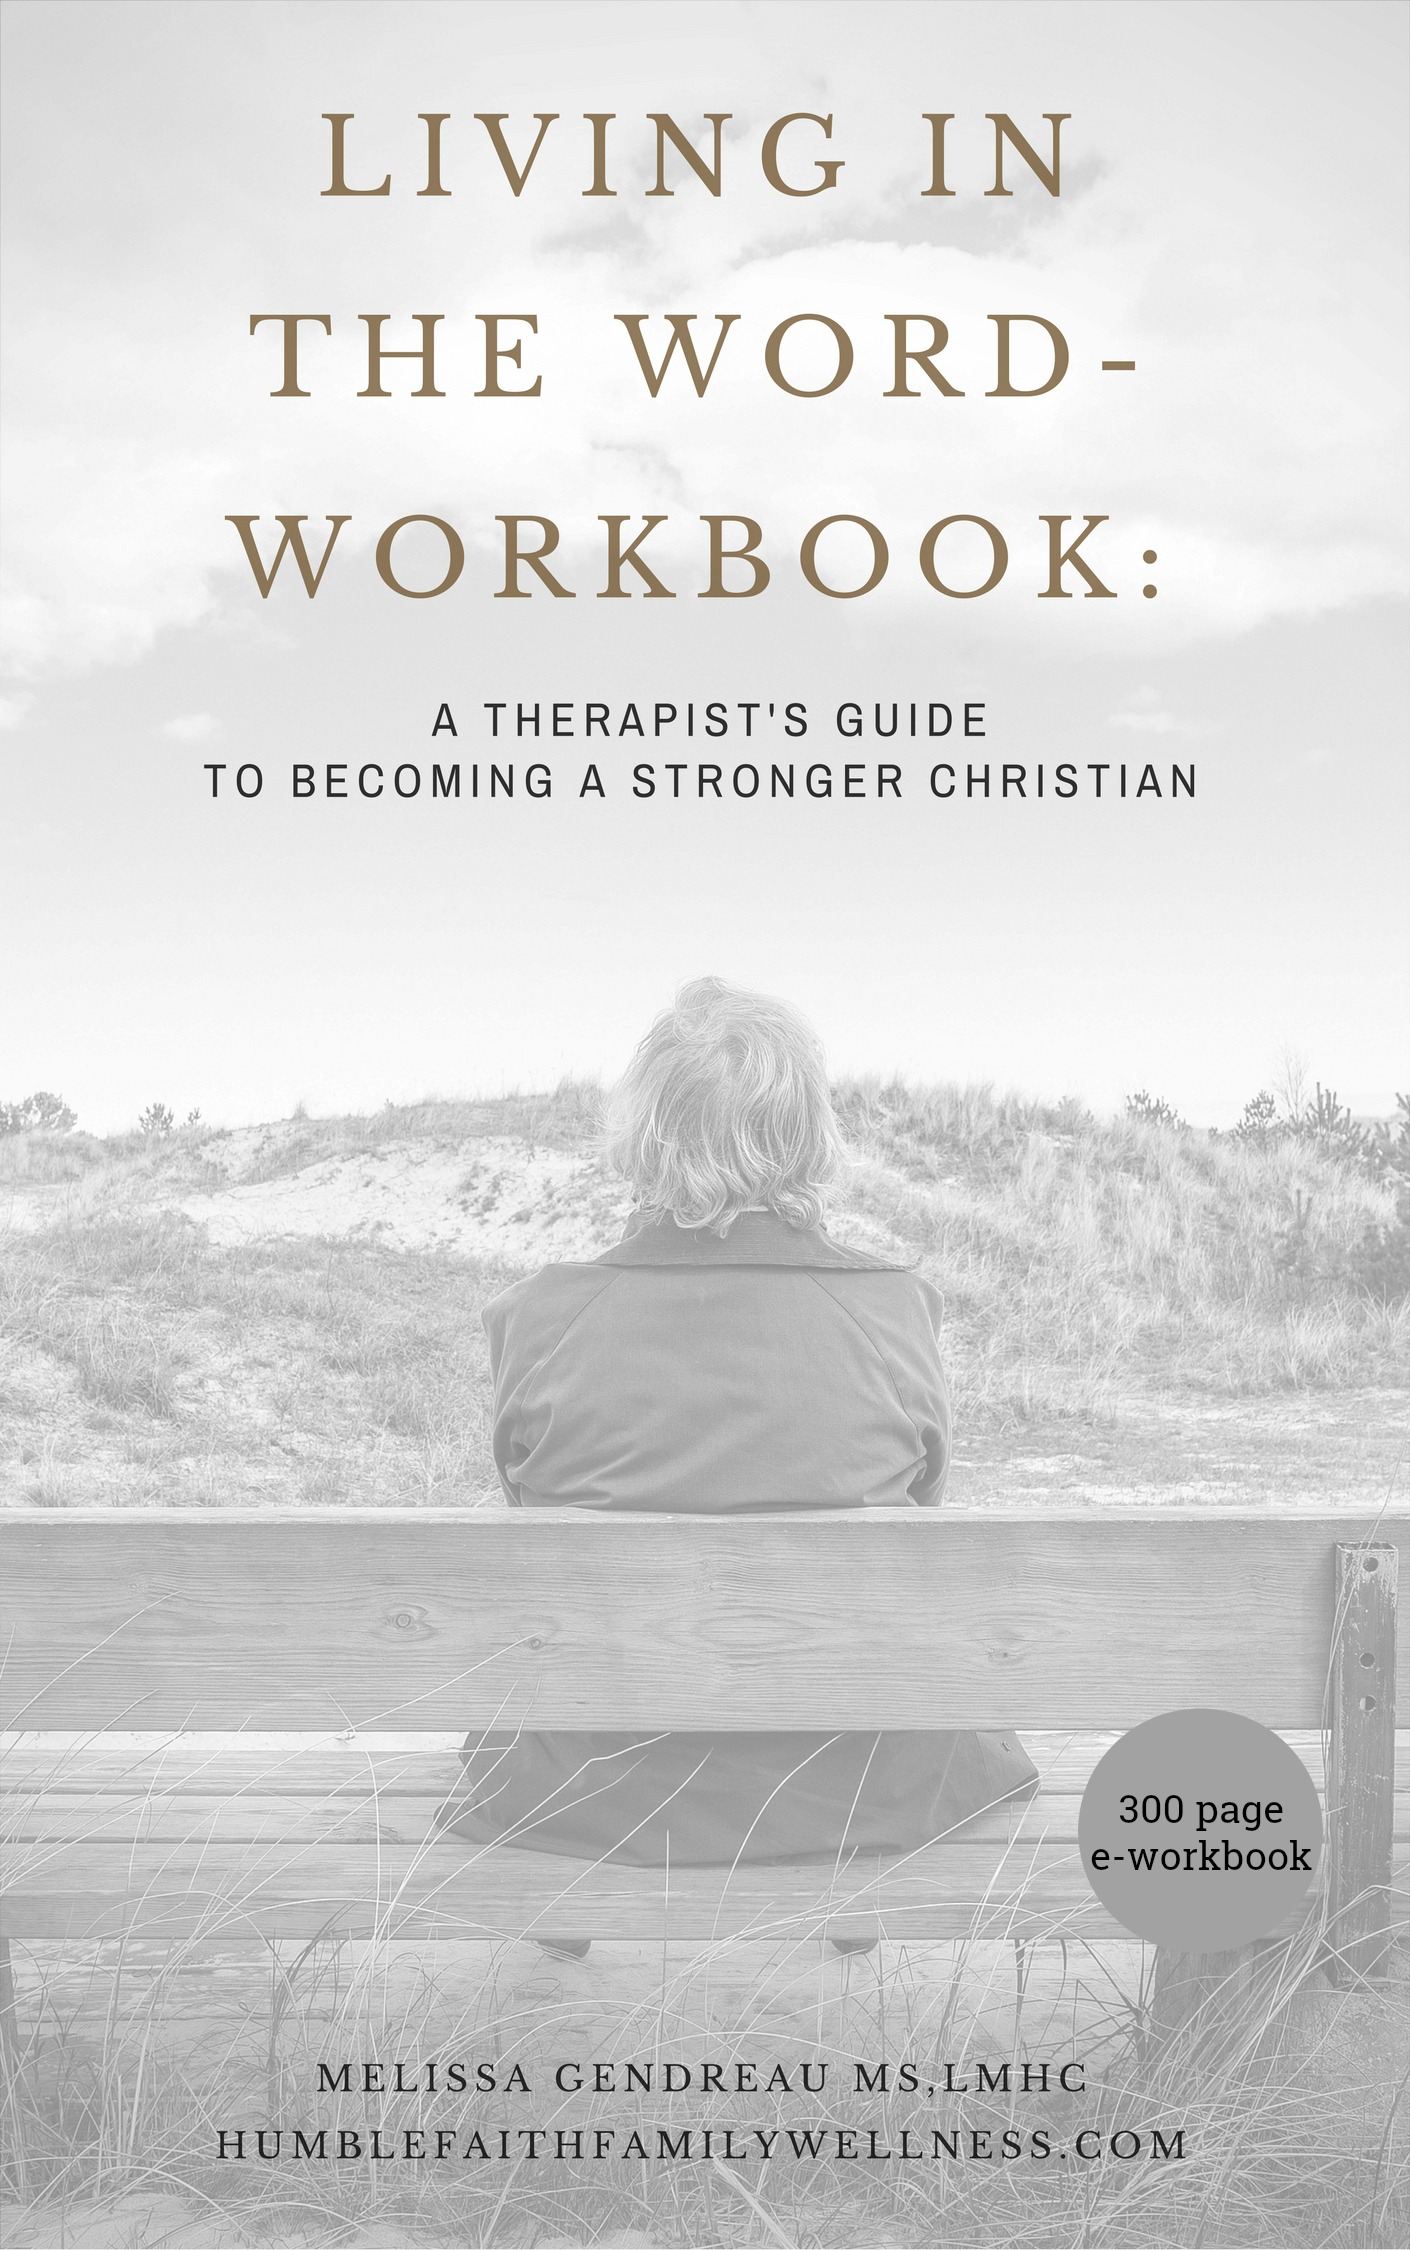 The Living in the Word - eWorkbook is 300 pages to guide you through all aspects of your life to help you become more aligned with God's word.